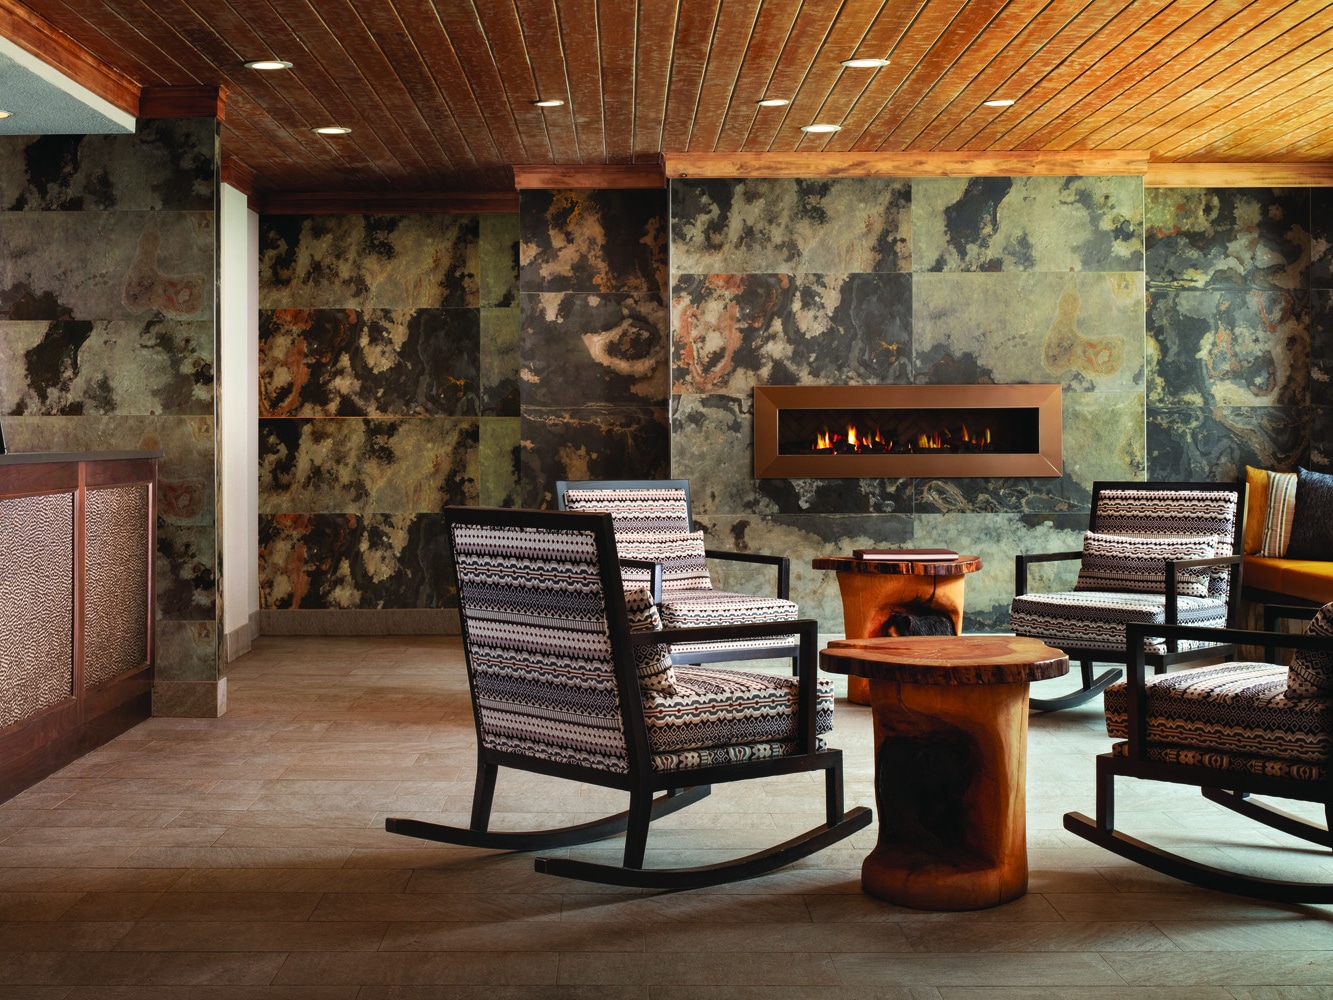 Marriott's Mountain Valley Lodge Lobby. Marriott's Mountain Valley Lodge is located in Breckenridge, Colorado United States.